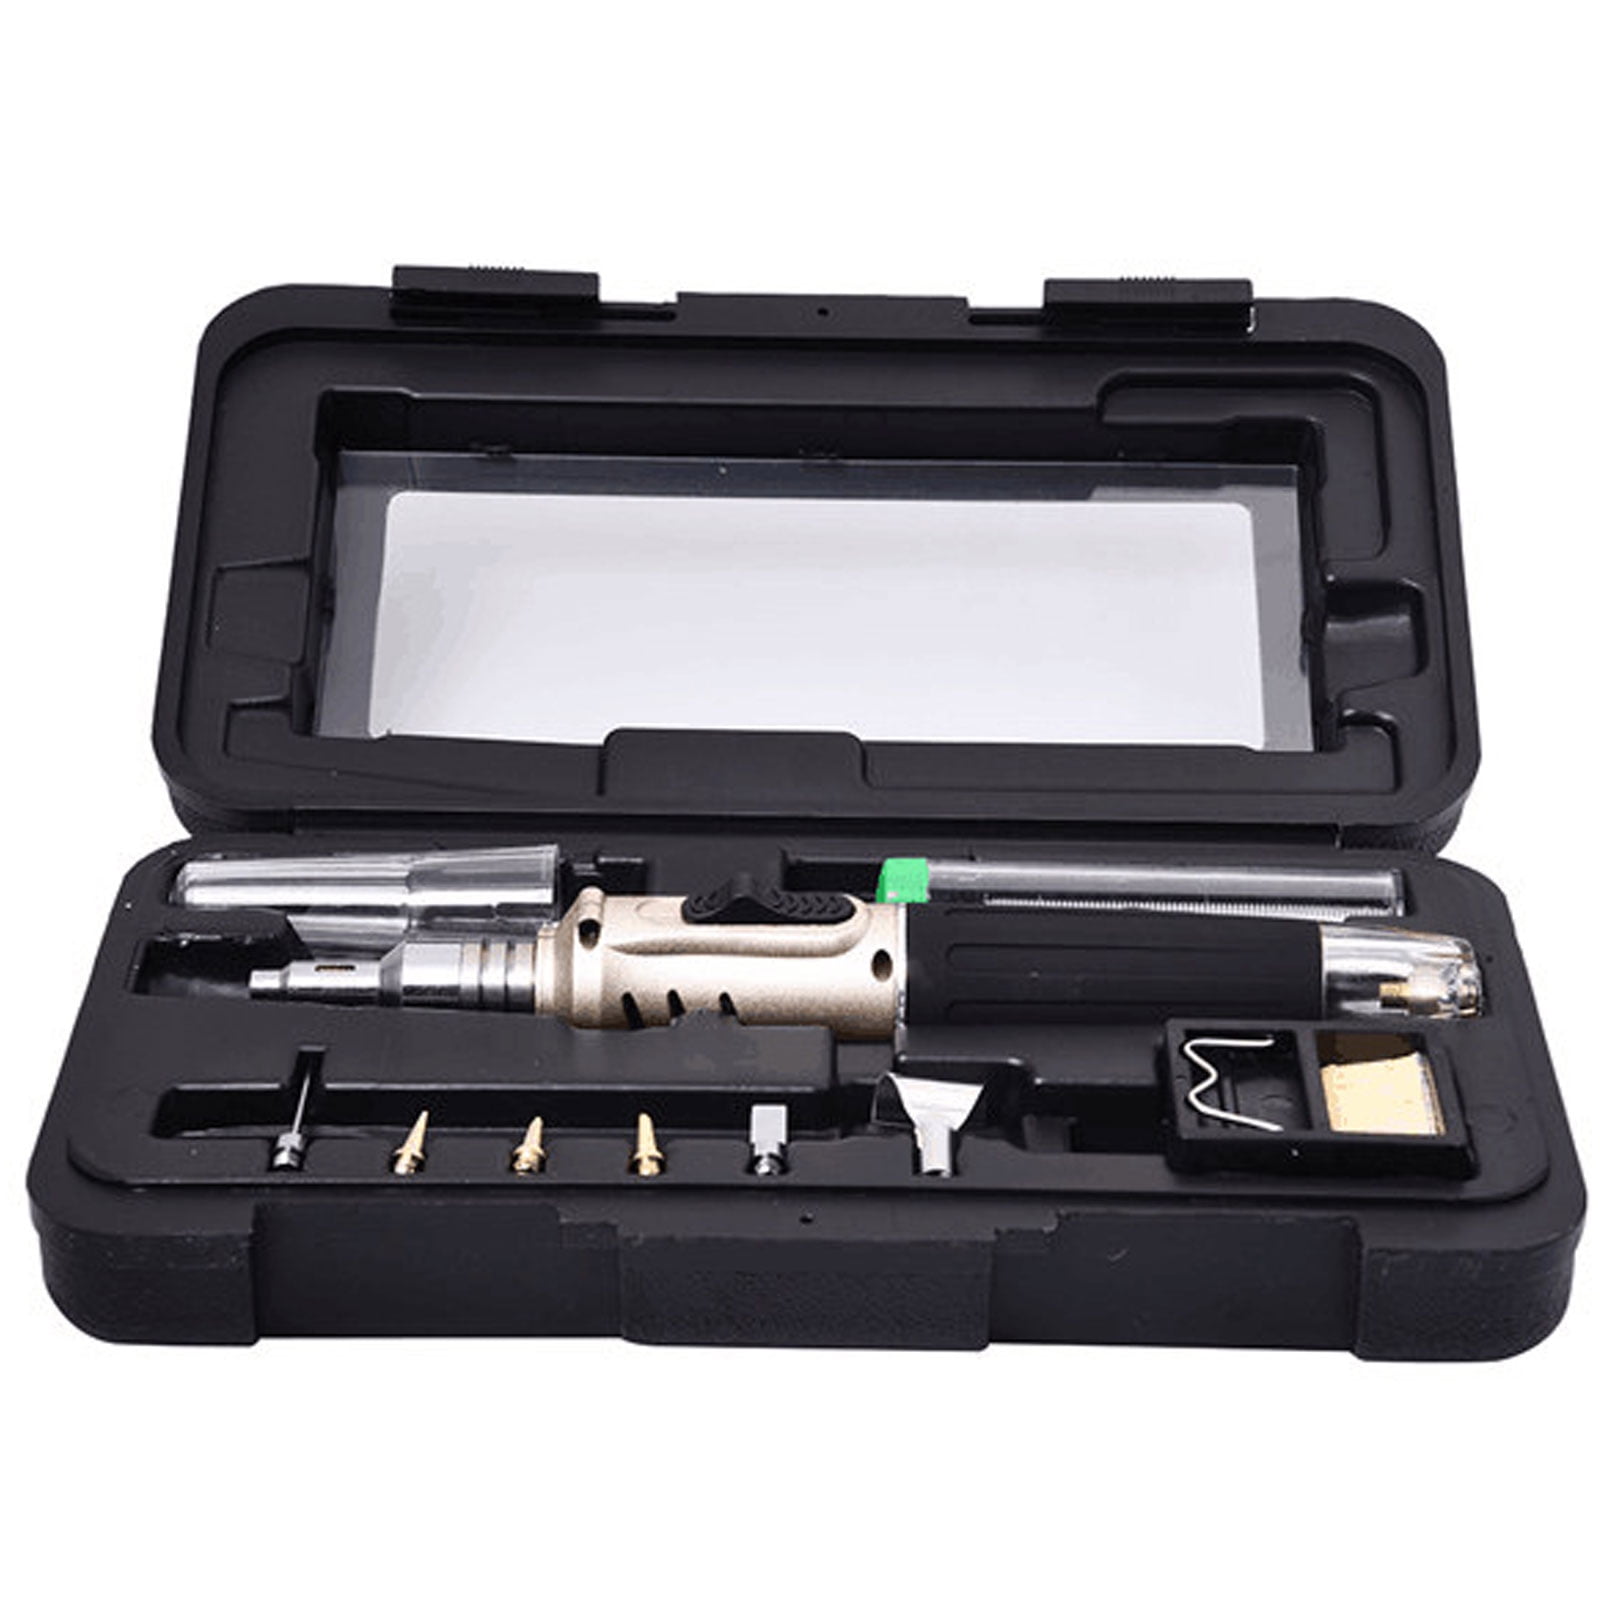 Cordless Auto Ignition Butane Gas Soldering Iron Kit Ignite Welding Torch Tool . 